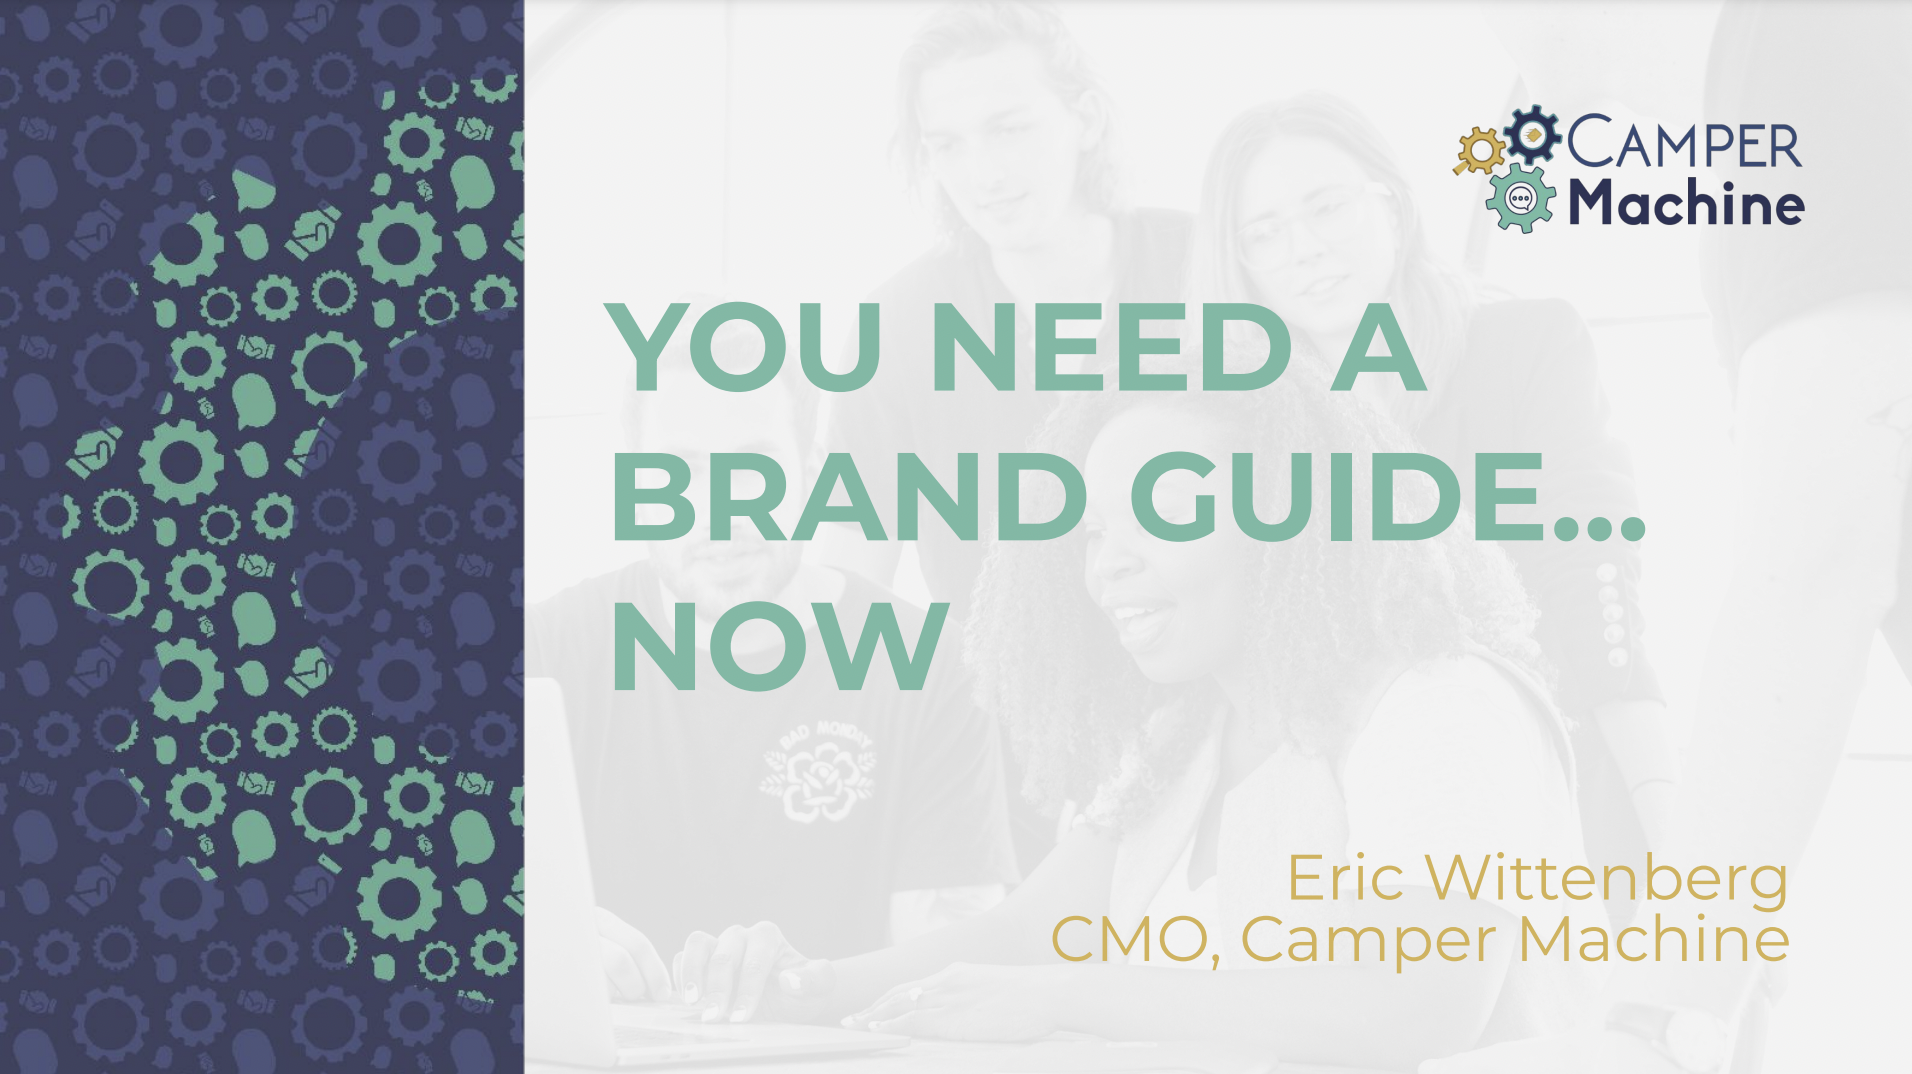 Summer Camps Need Brand Guide Marketing